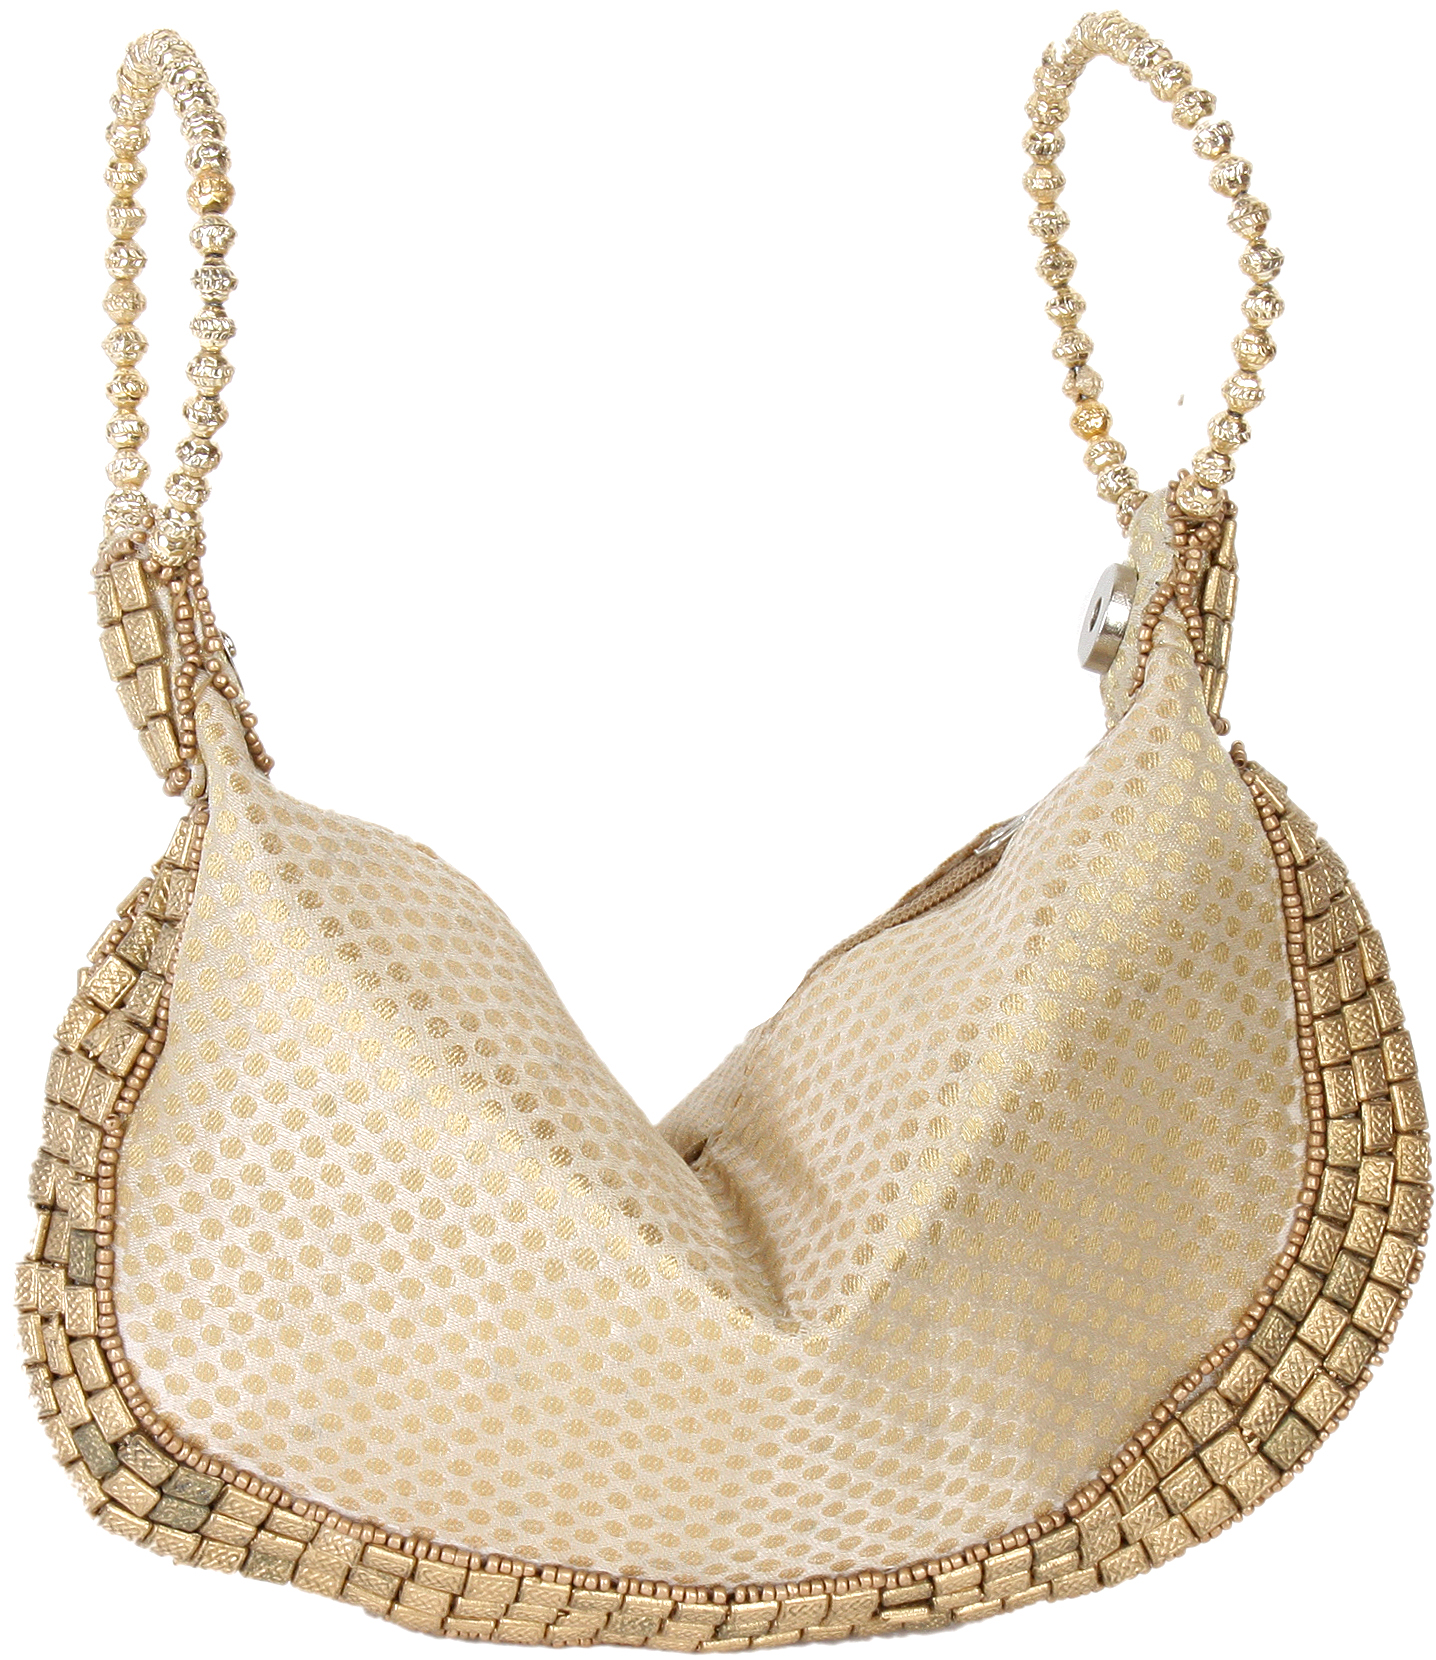 Ivory and Golden Bracelet Bag with Brocade Weave and Beadwork | Exotic ...